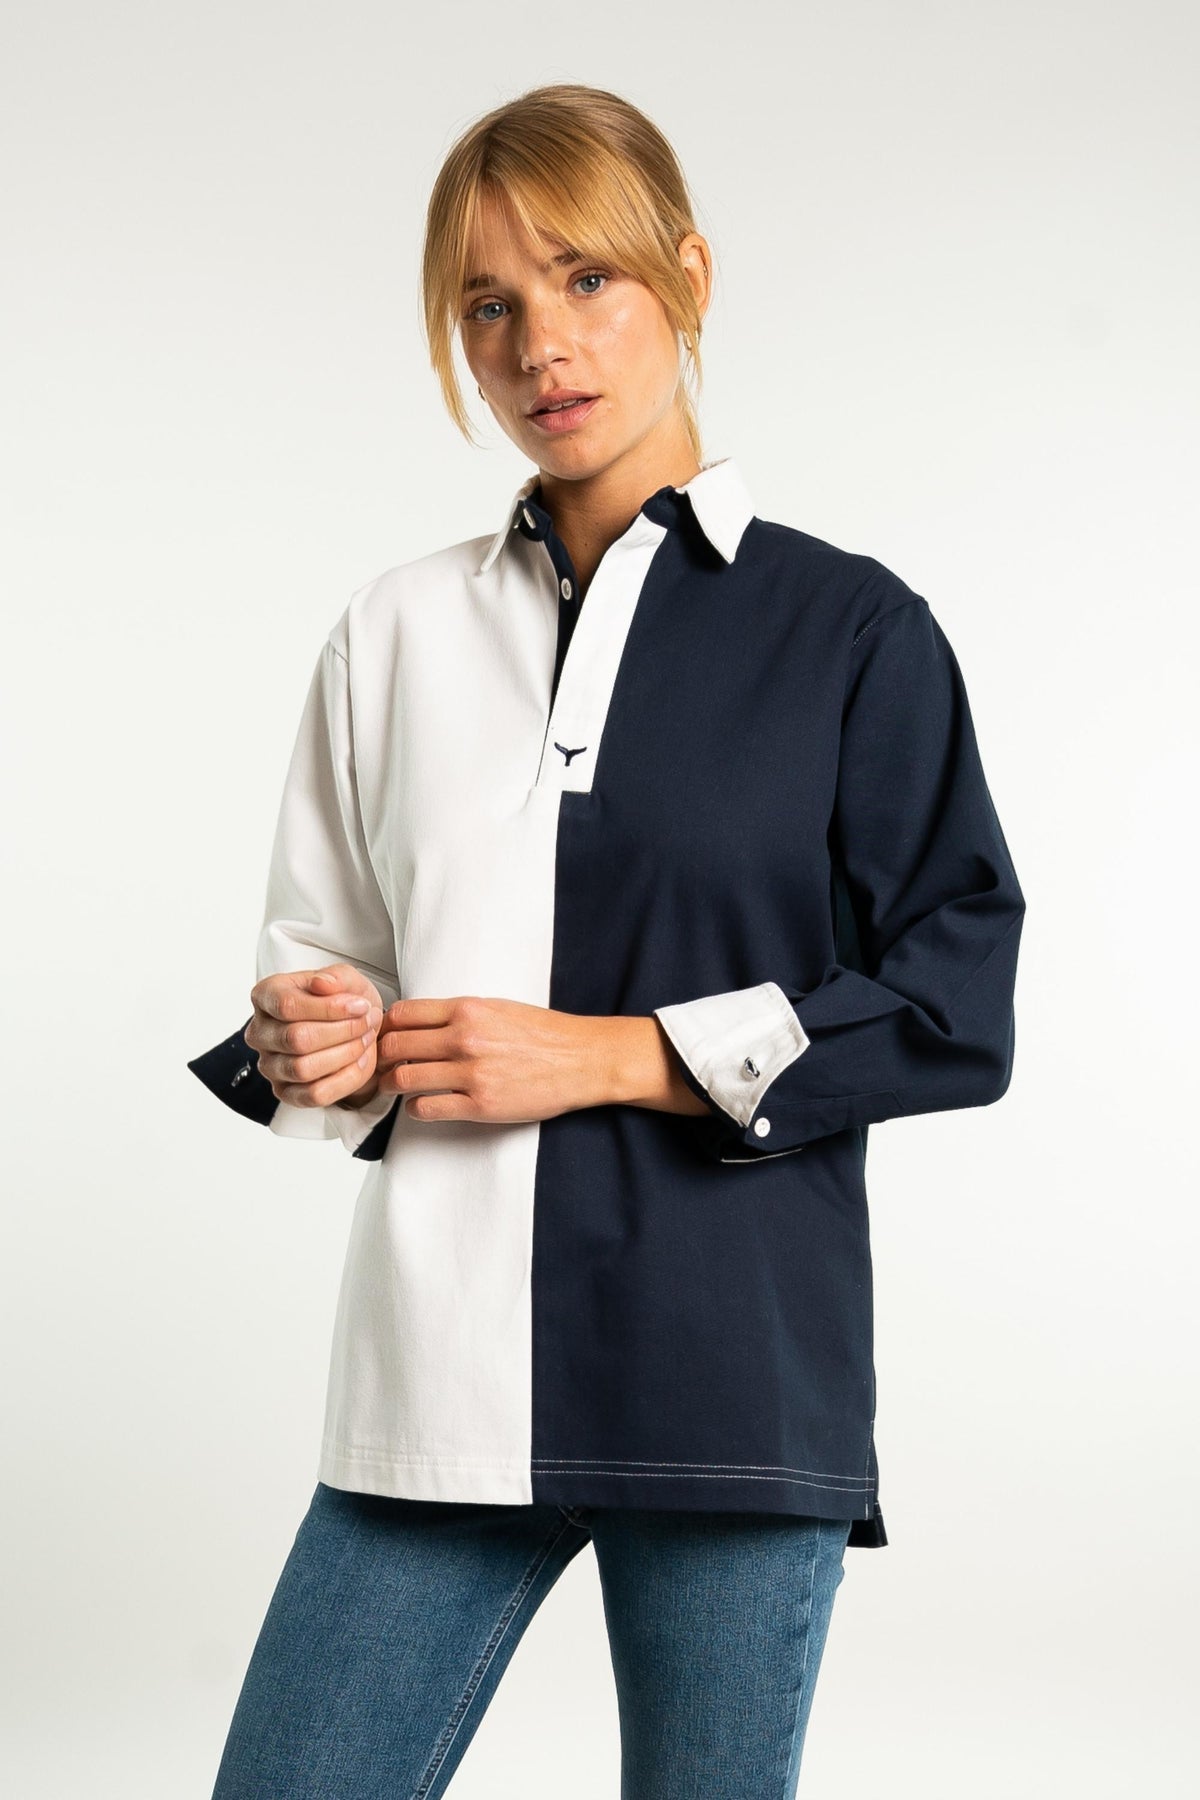 Falmouth Unisex Deck Shirt - White & Navy - Whale Of A Time Clothing